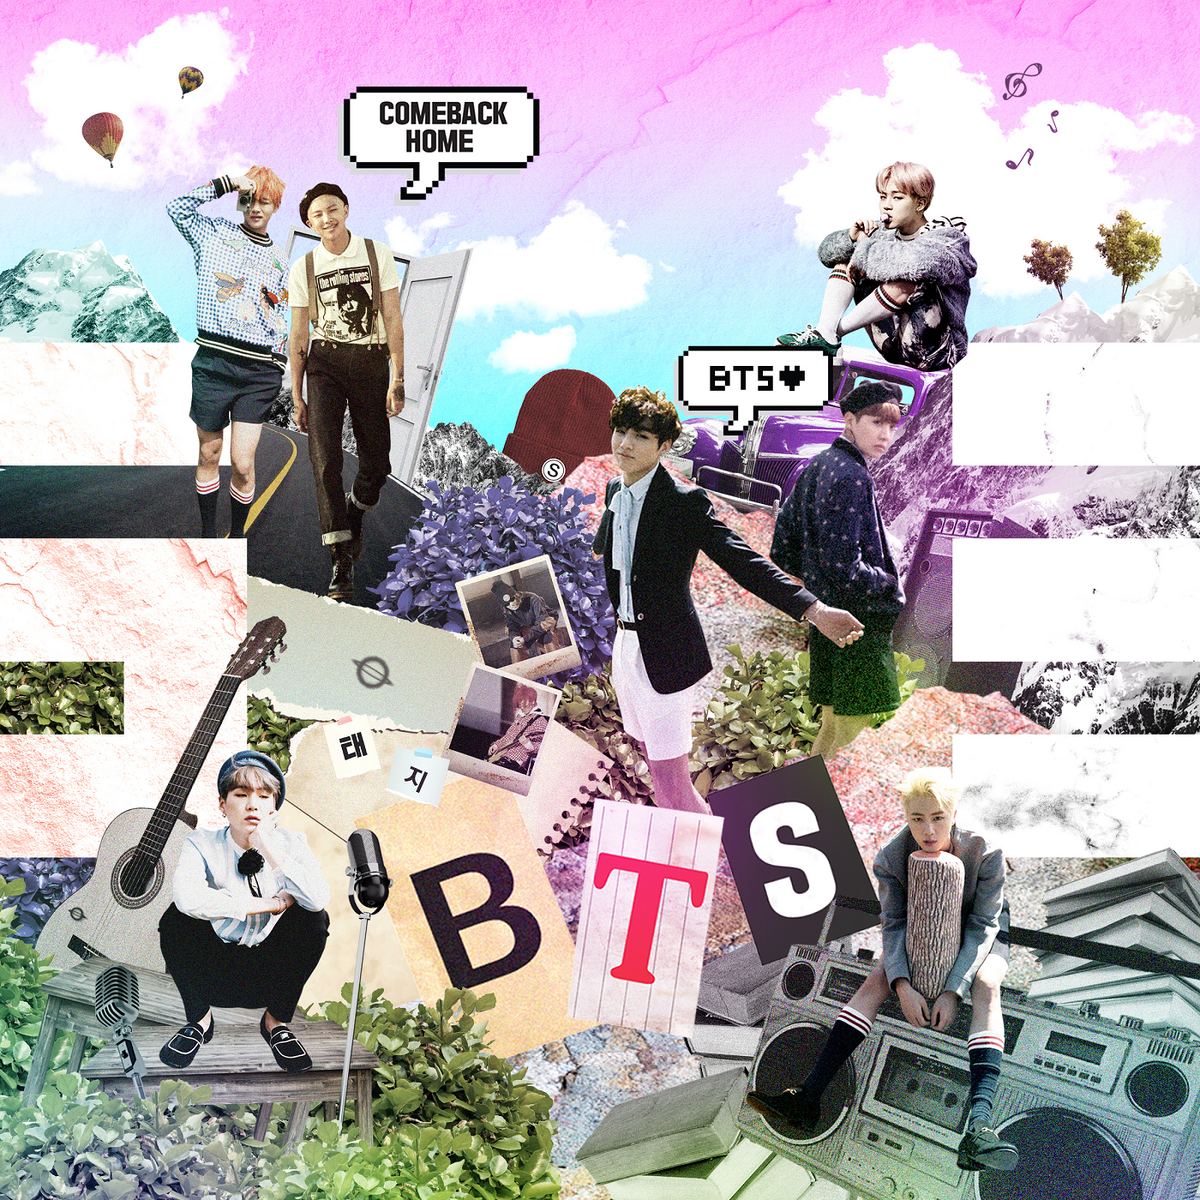 Home бтс. БТС хоме. Камбэк хоум BTS. Come back Home БТС. Yet to come BTS обложка.